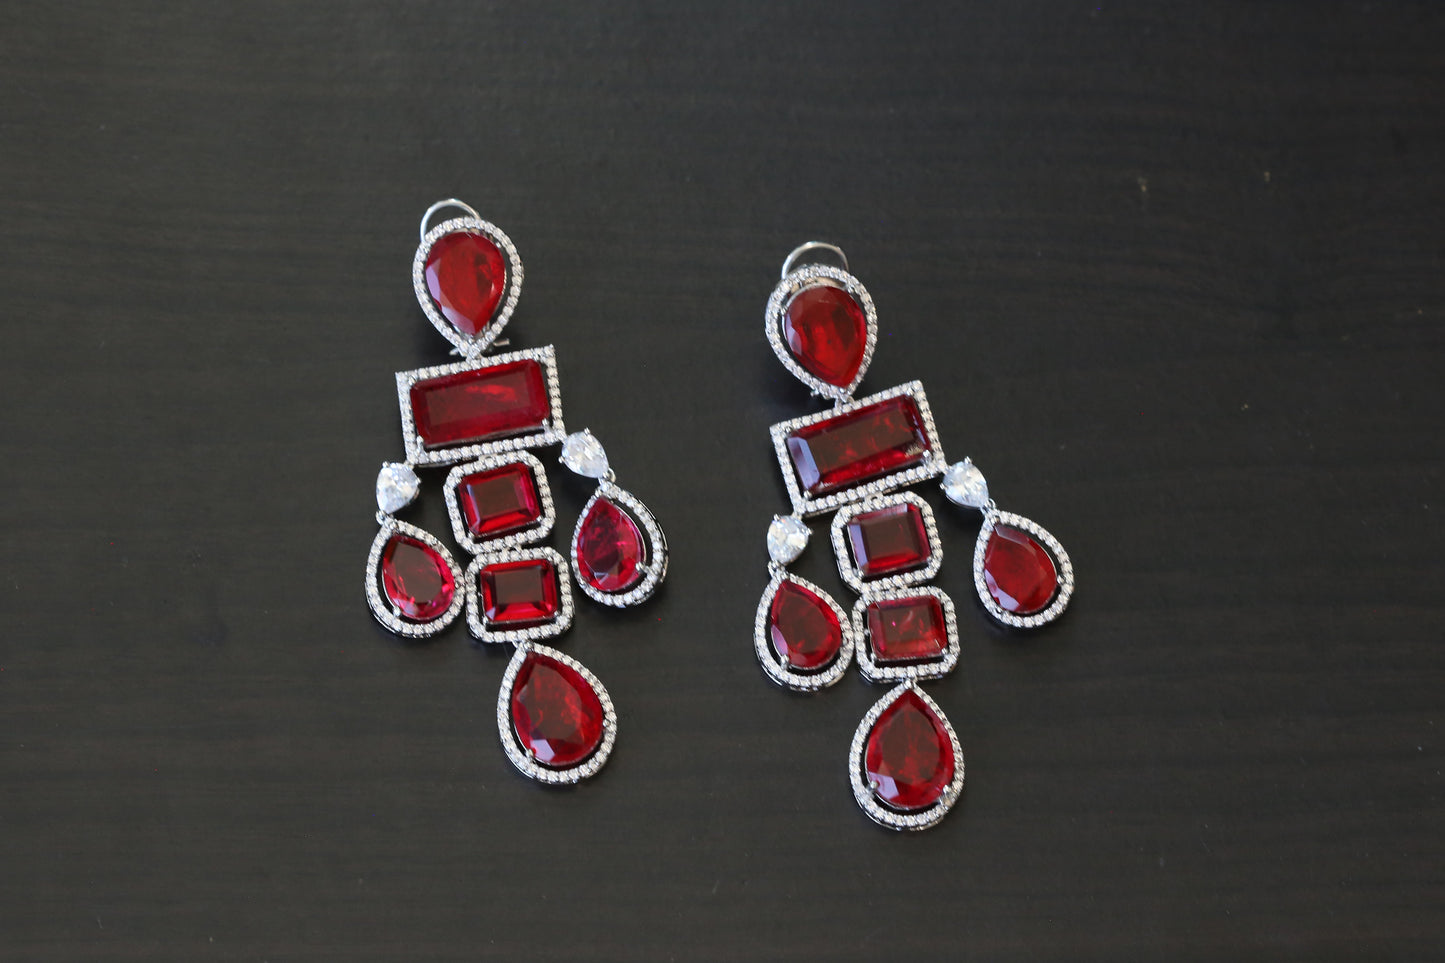 Large Premium Doublet Earrings - Red